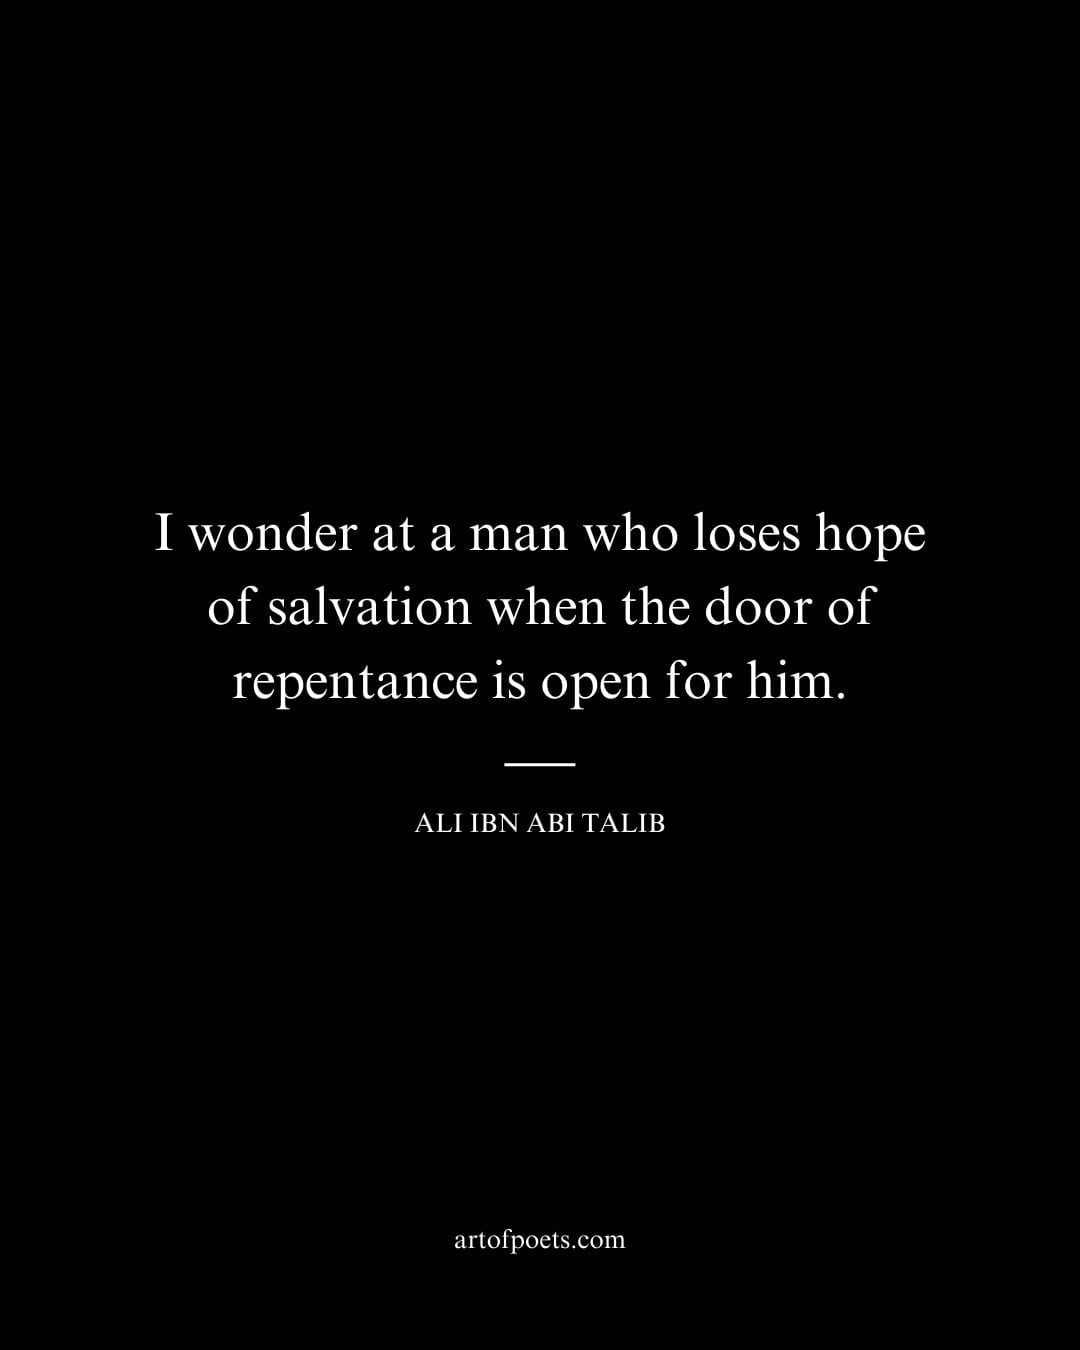 I wonder at a man who loses hope of salvation when the door of repentance is open for him